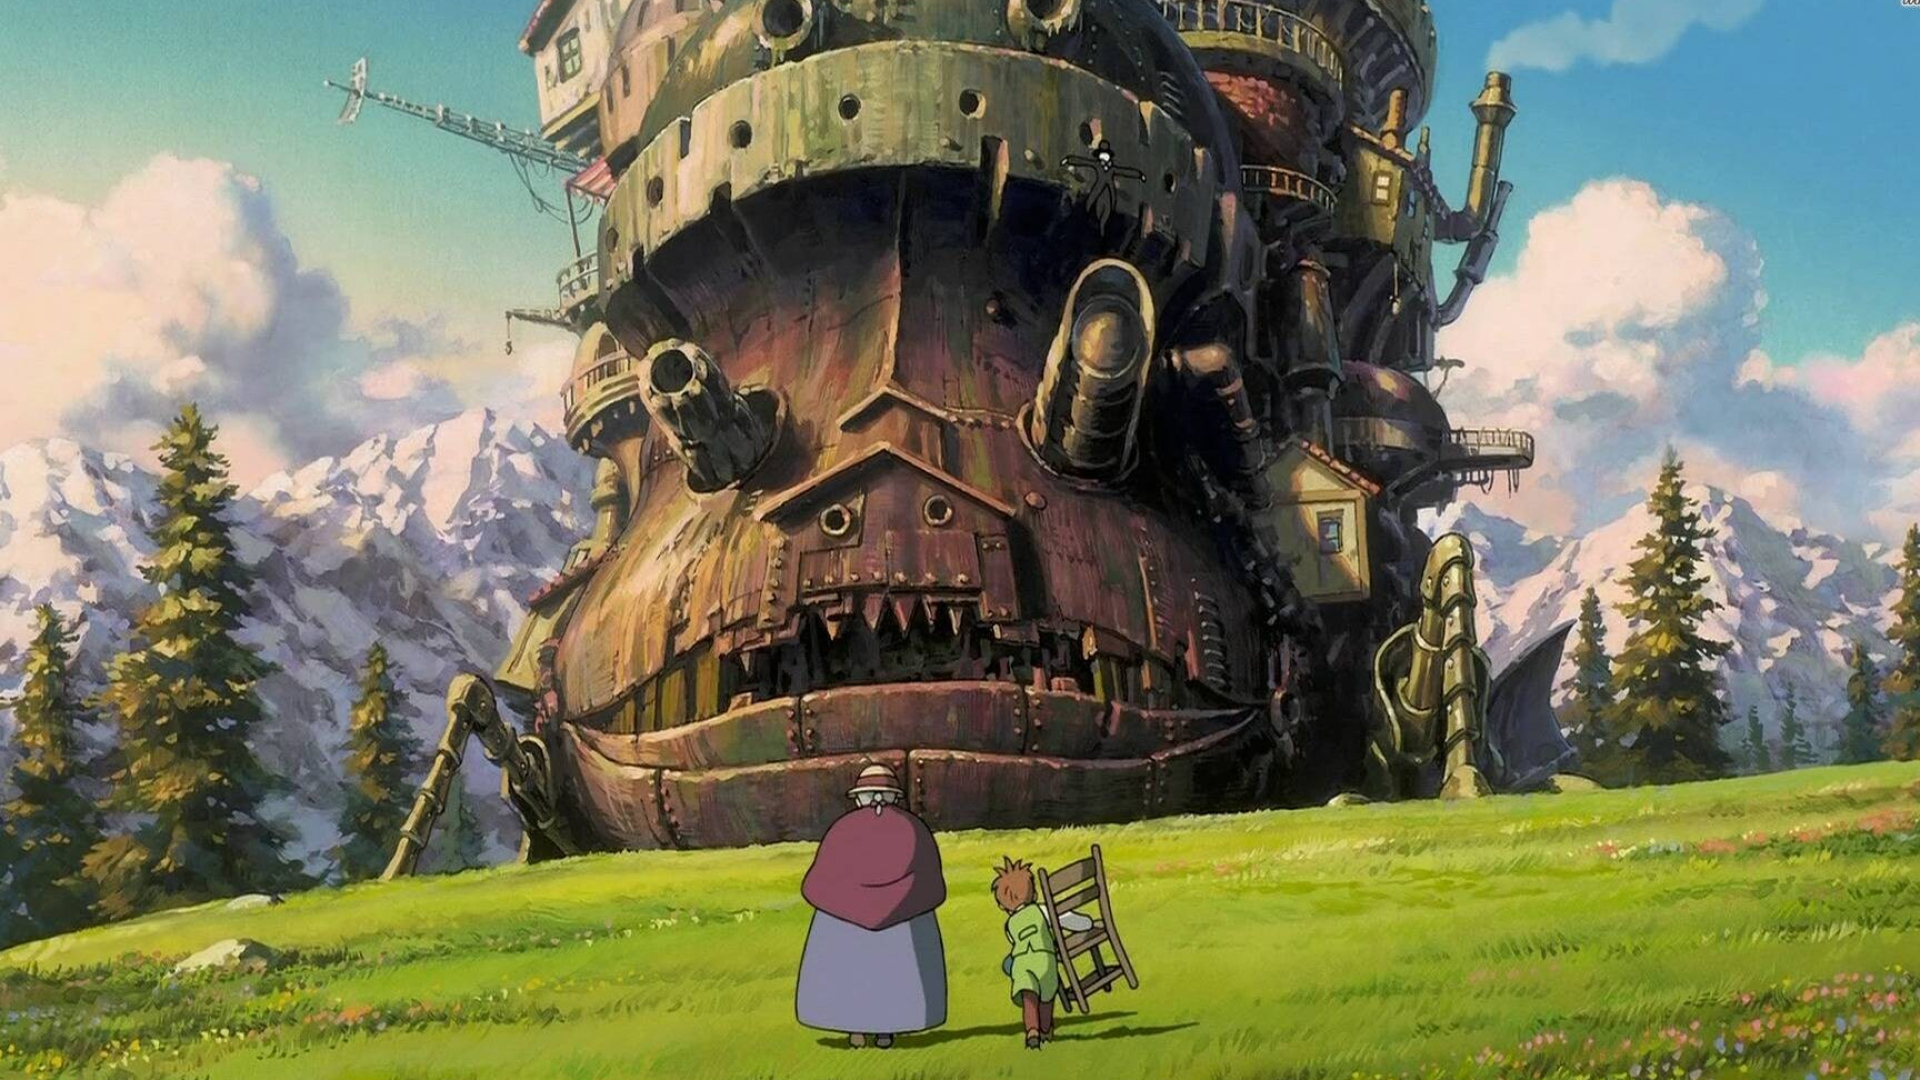 Studio Ghibli: The English dub version starred Jean Simmons, Emily Mortimer, and Christian Bale. 1920x1080 Full HD Background.